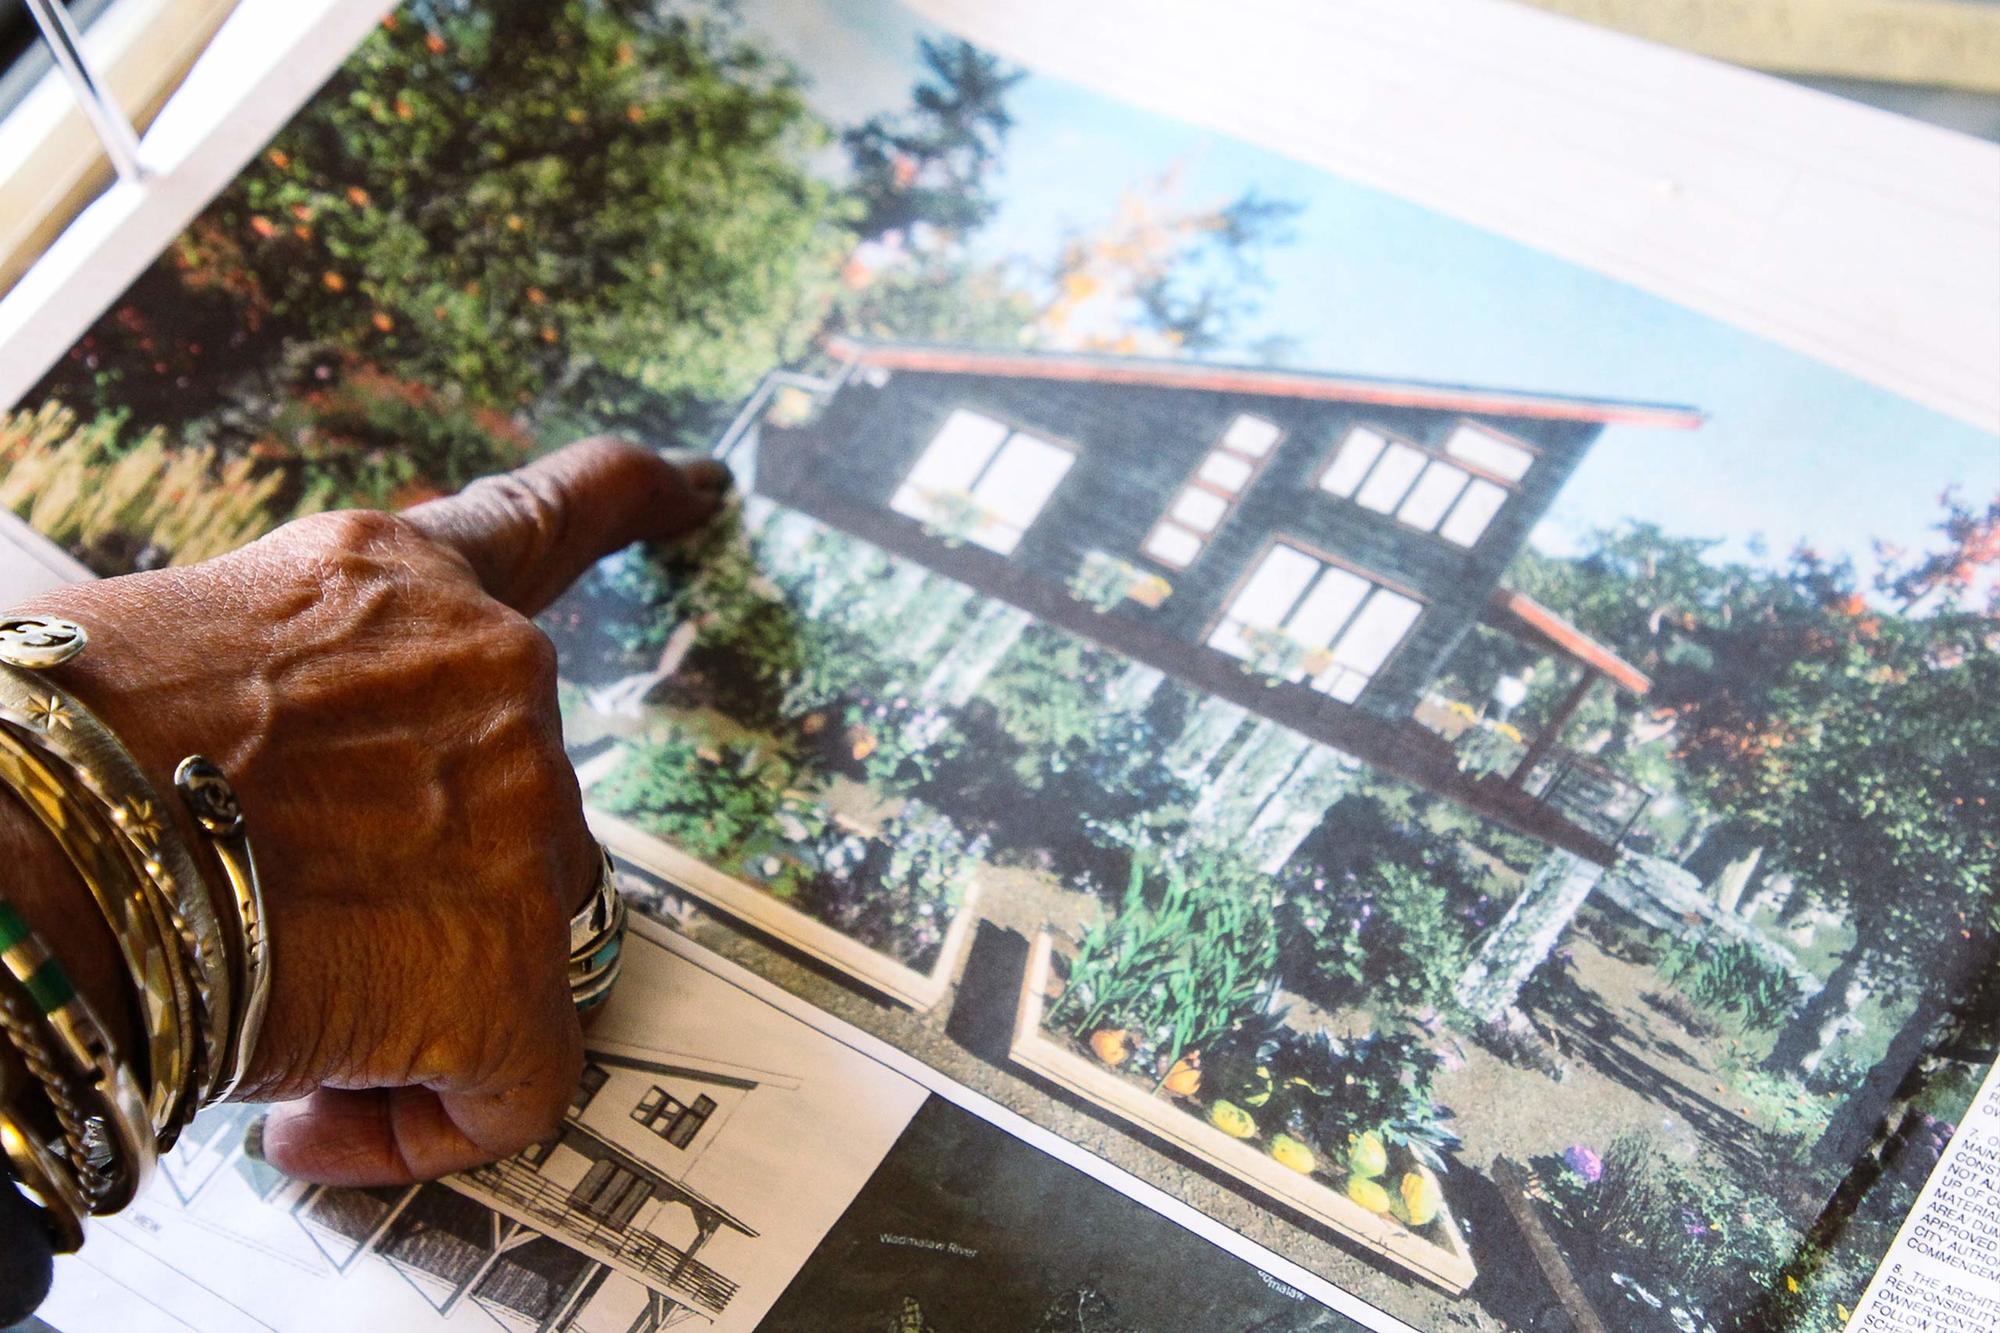 The hand of Arianne King Comer points at a photo of a brown house and green garden with more photos below March 2022.